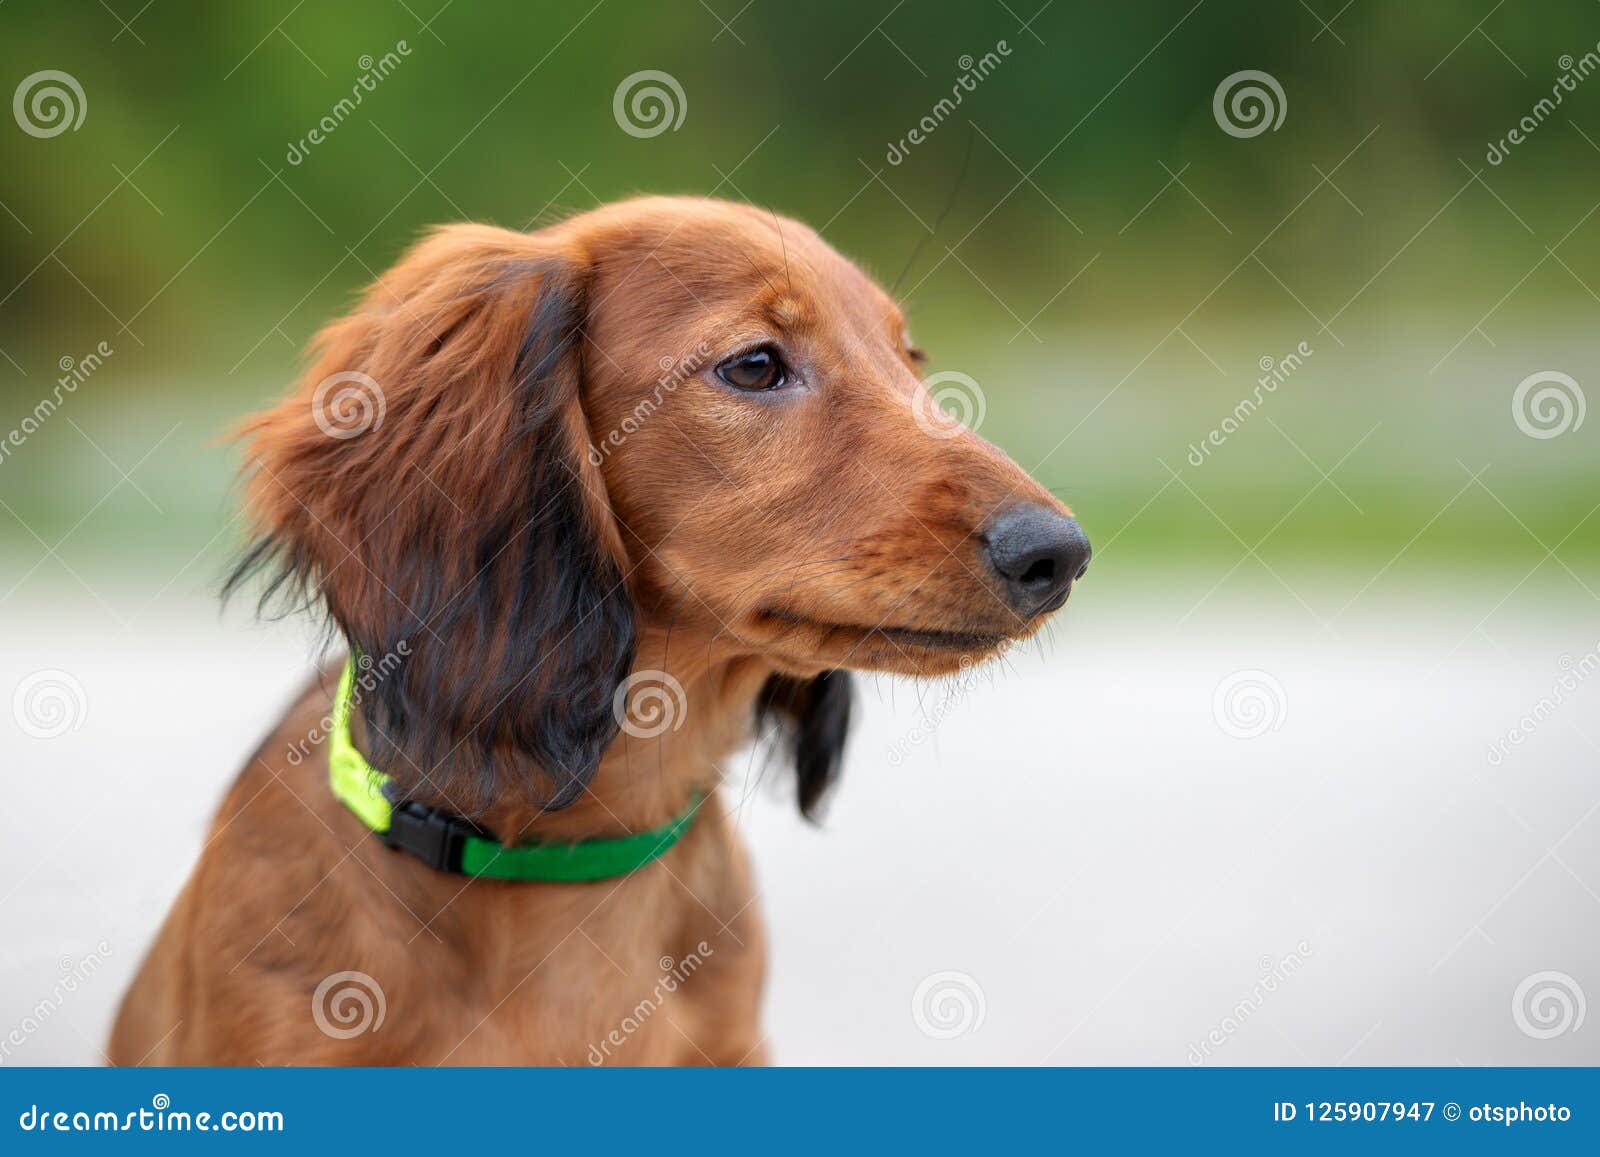 Long Haired Dachshund Puppy Posing Outdoors Stock Image